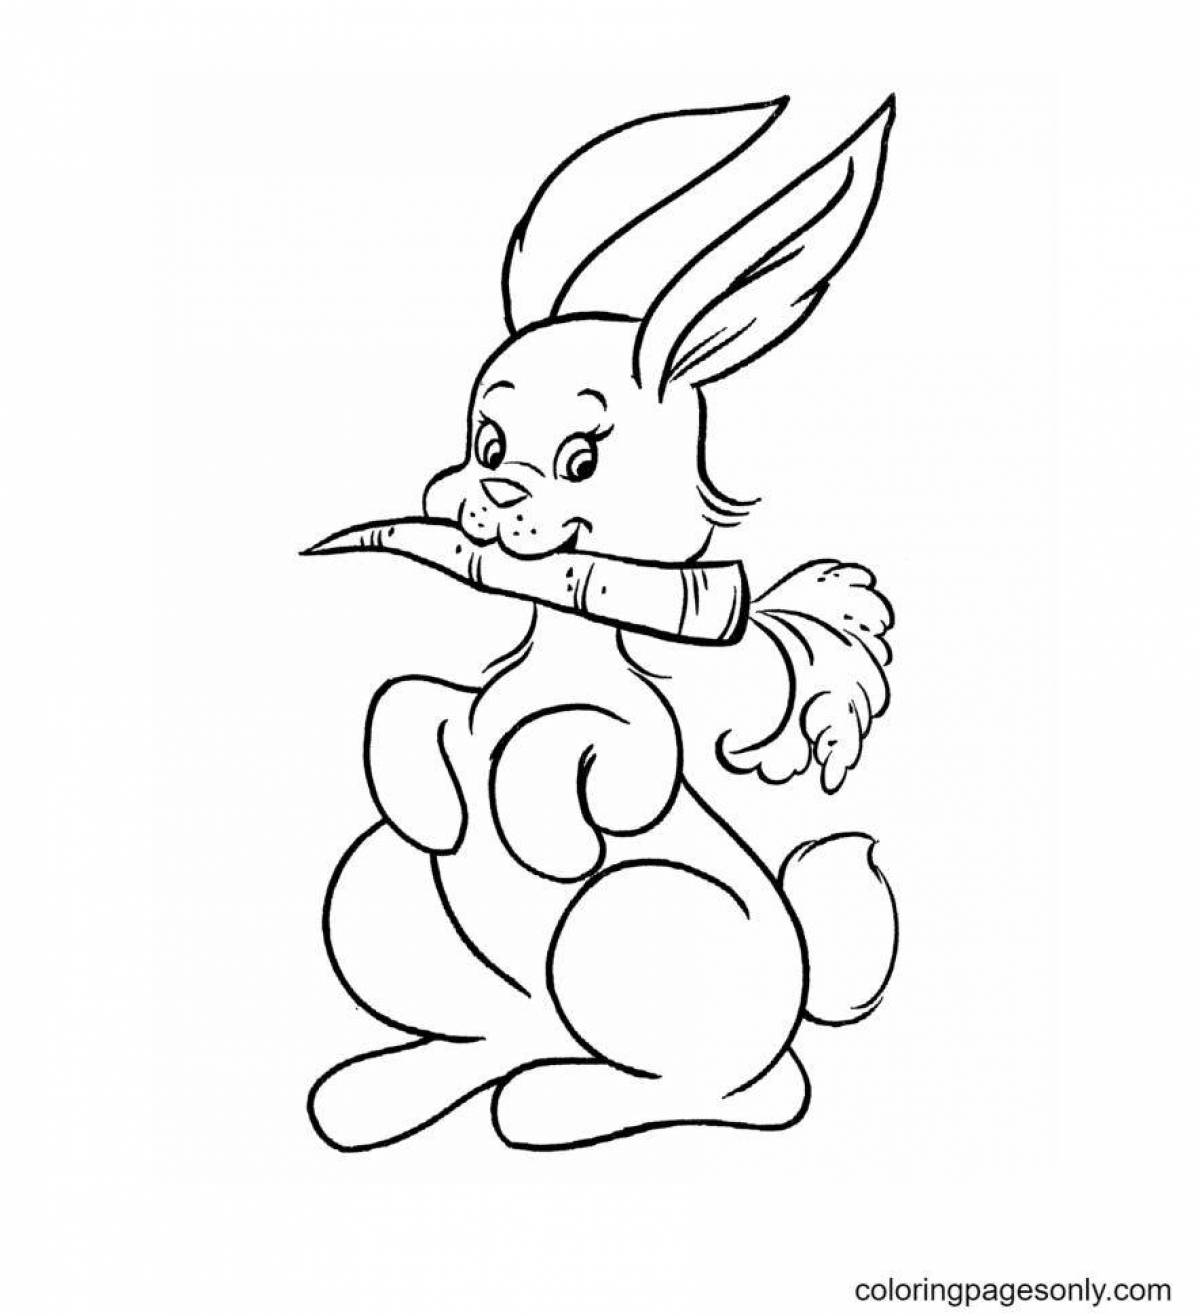 Coloring page energetic rabbit with carrots